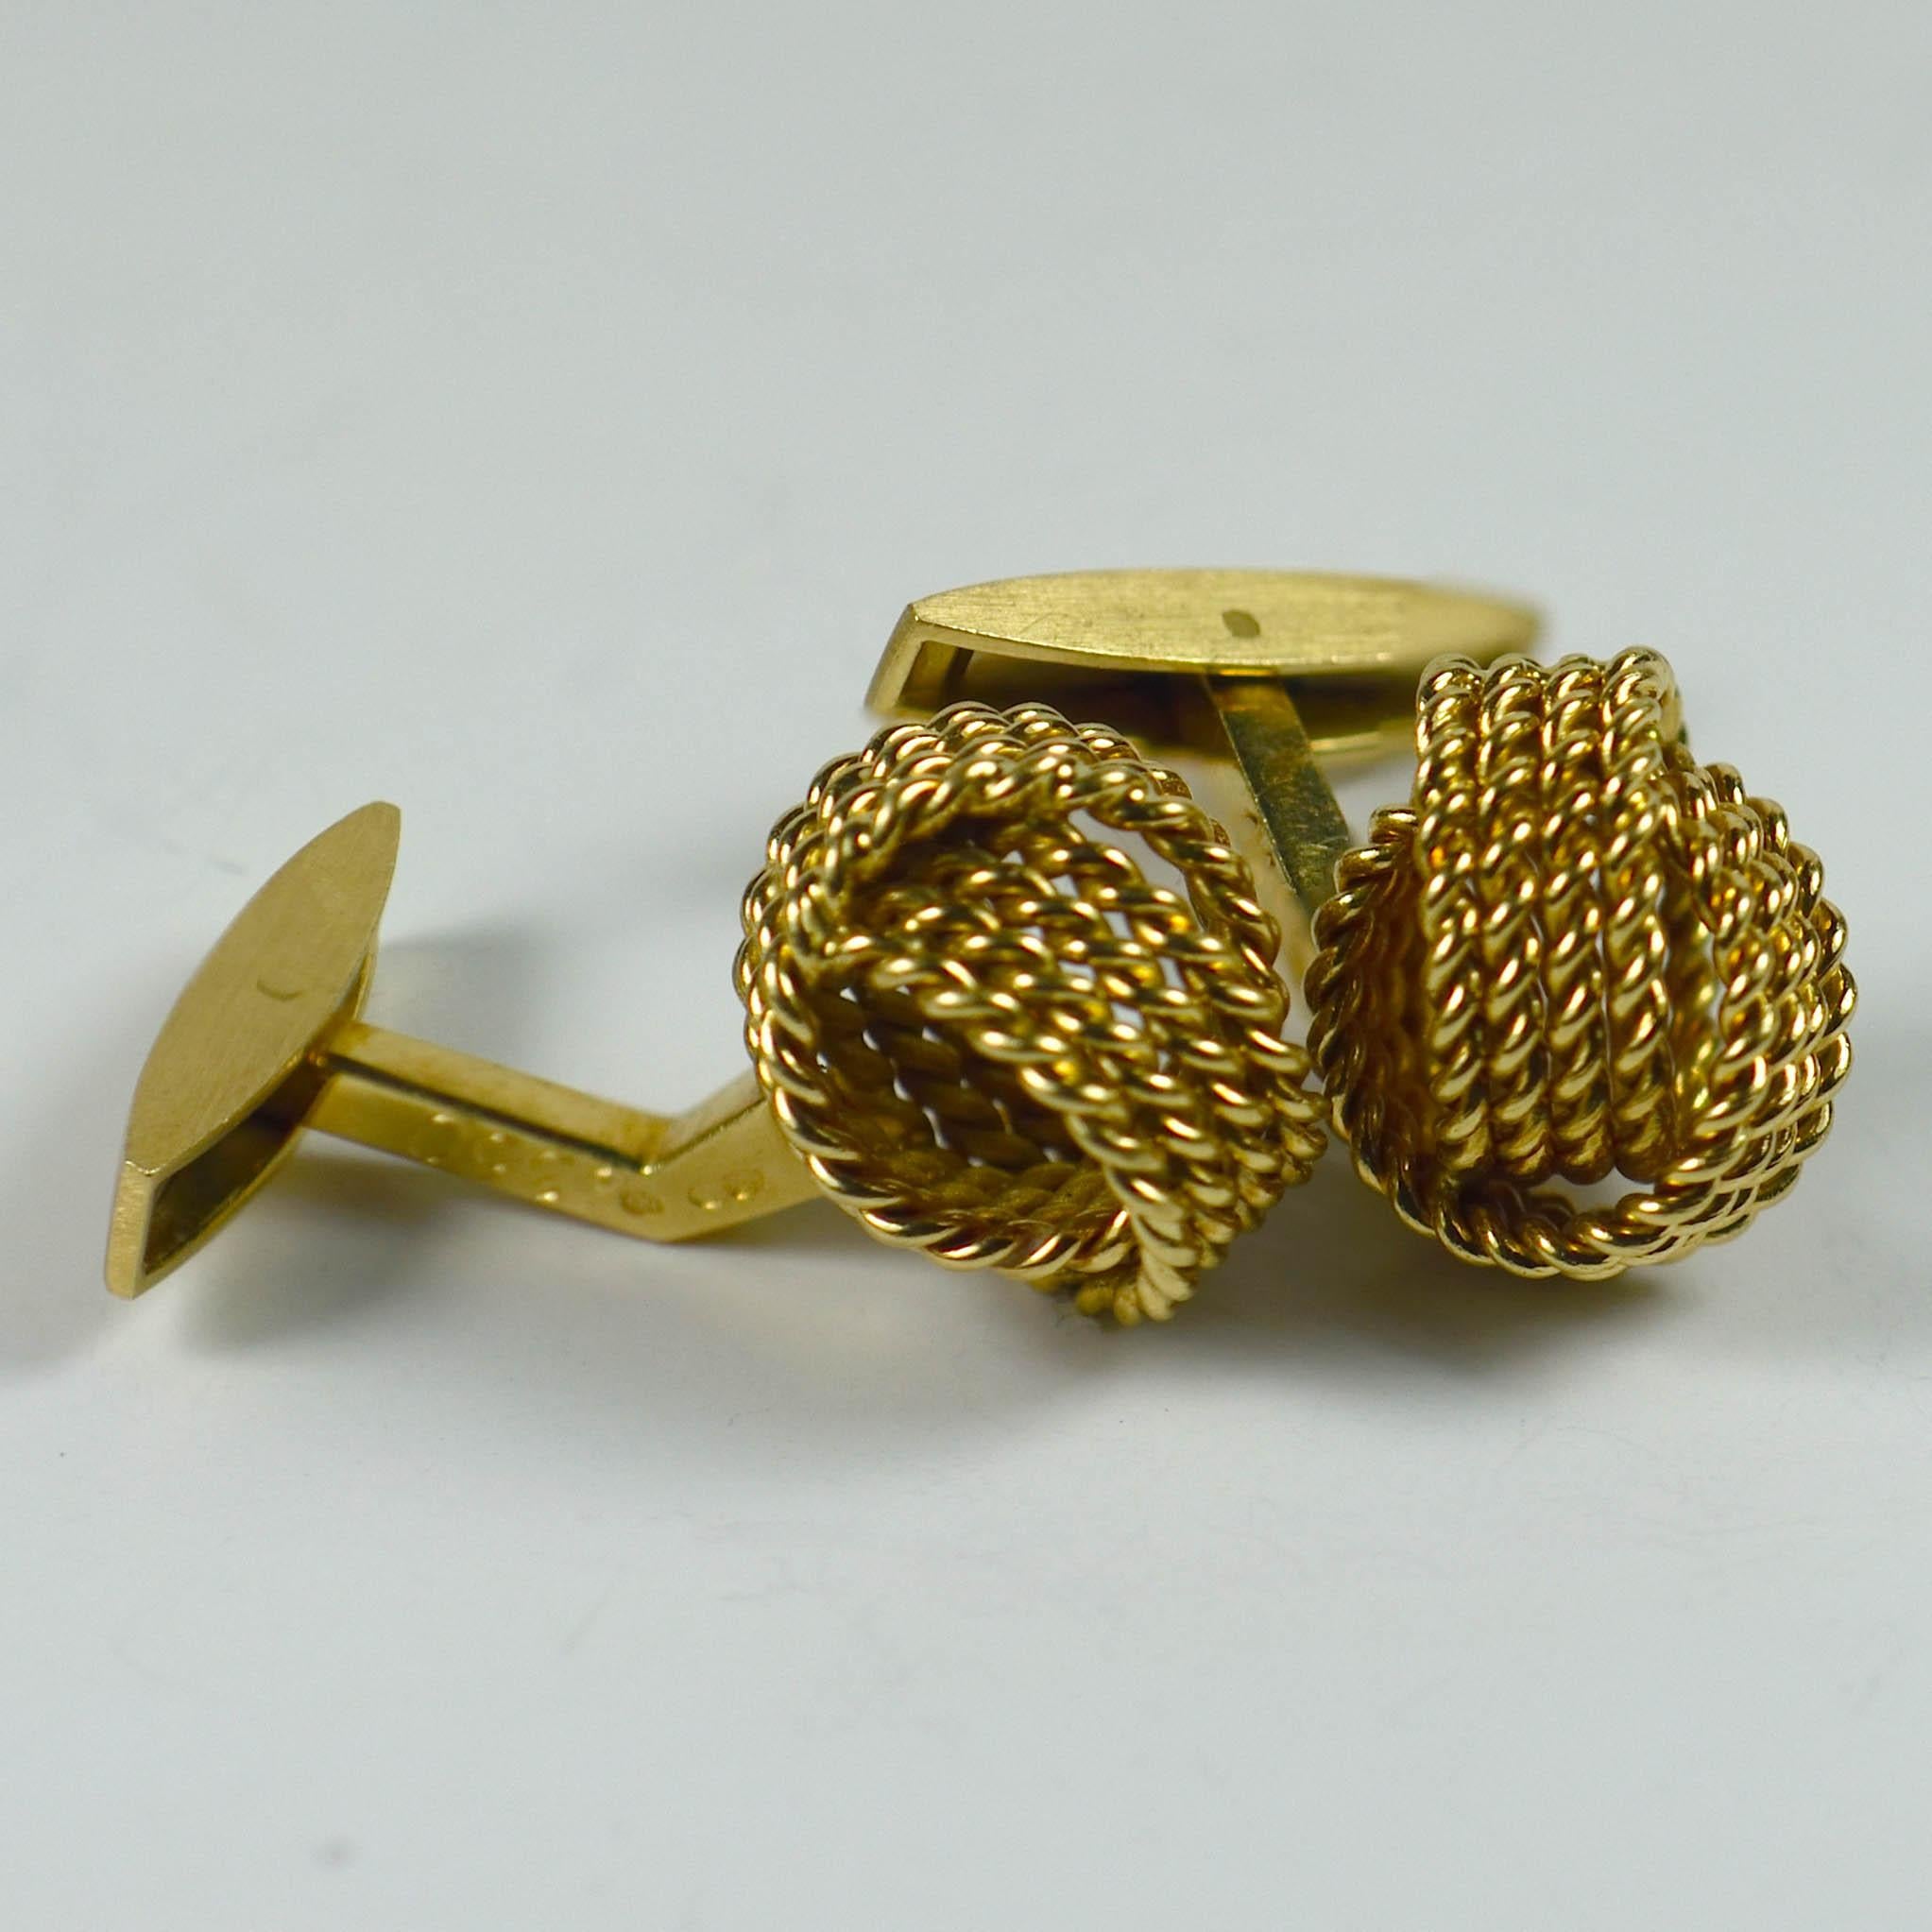 A smart pair of 18 karat gold twisted rope knot cufflinks by Chaumet Paris.
Signed CHAUMET, numbered and stamped with French marks.
1.25